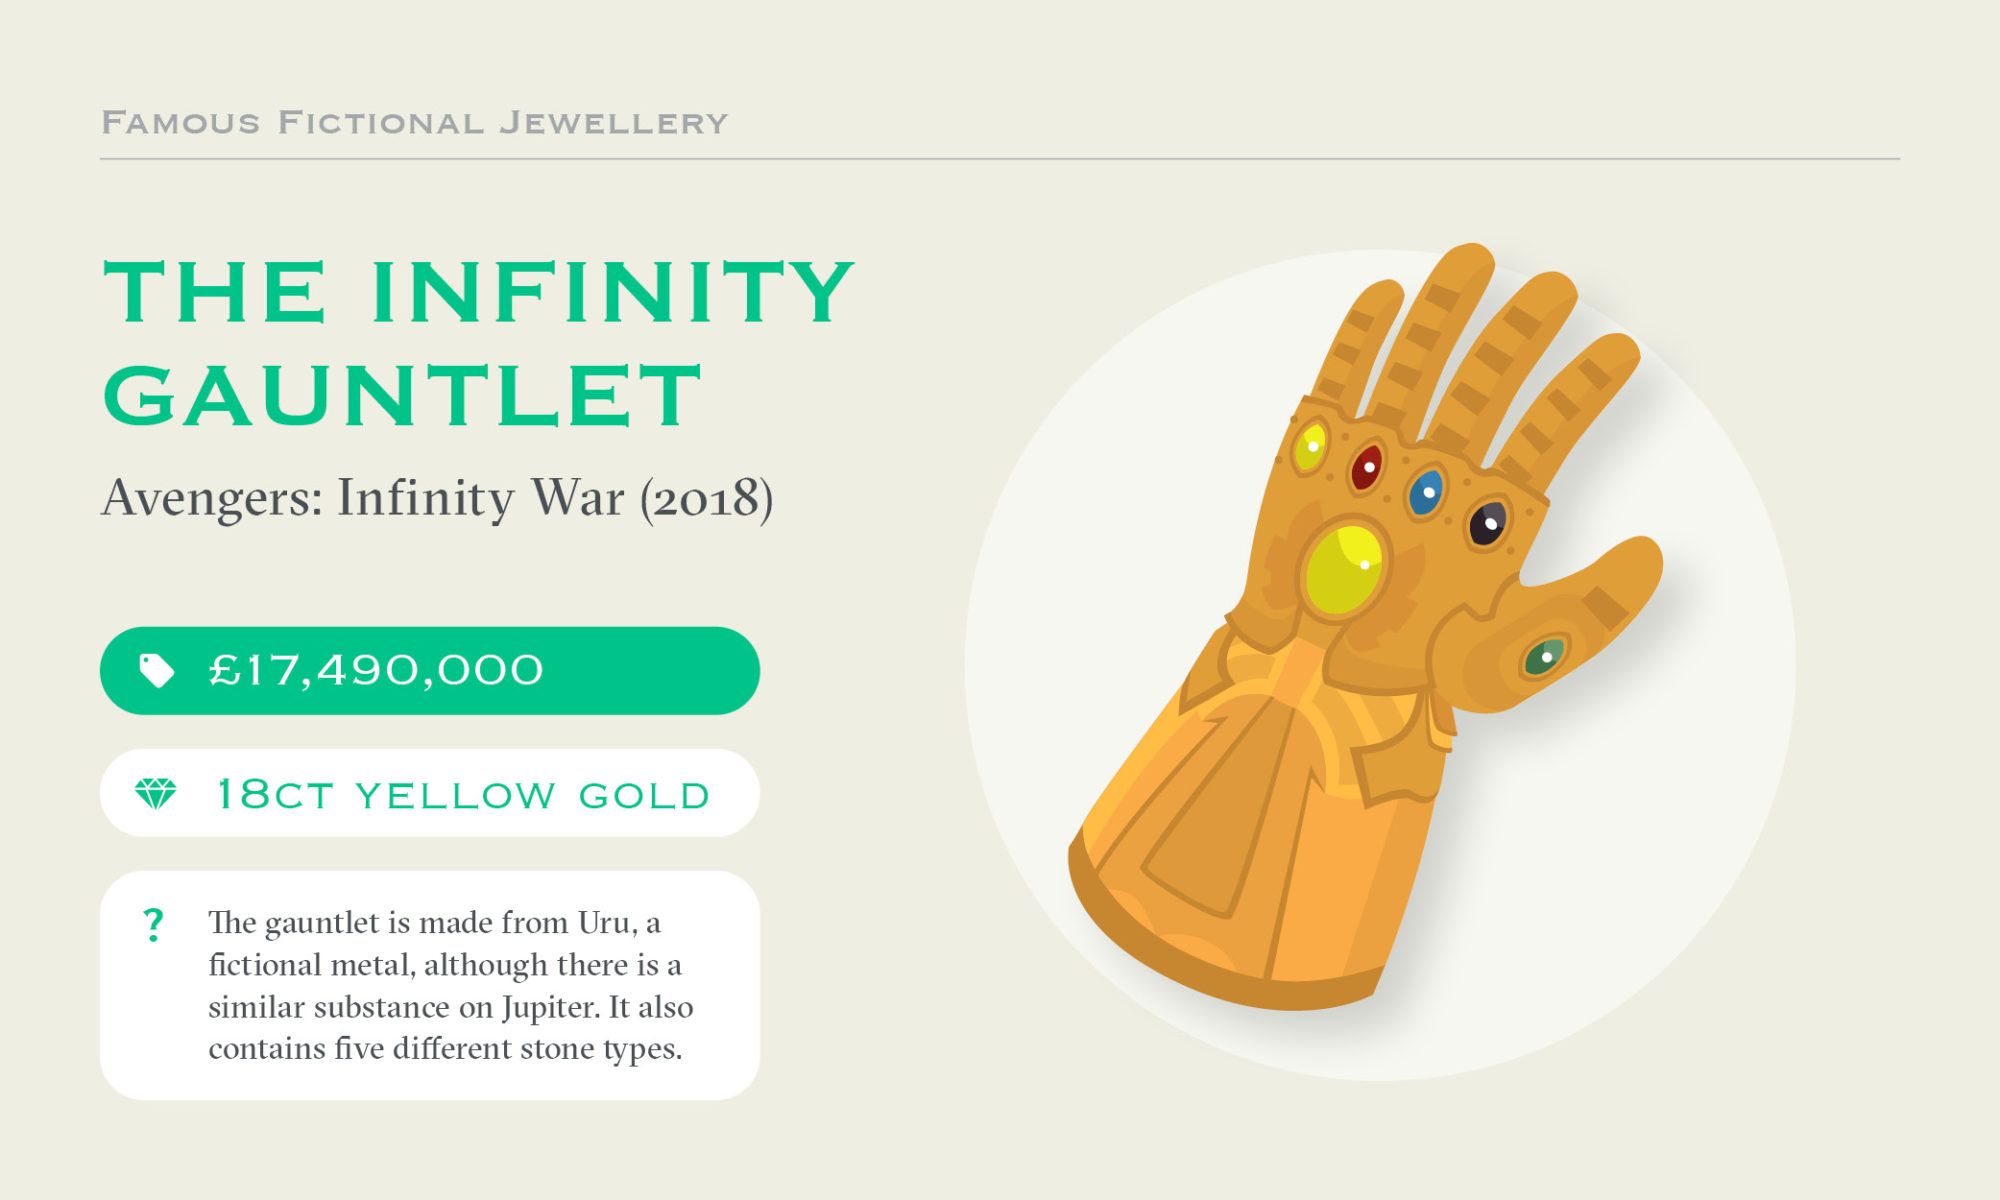 taylor-and-hart-fictional-jewellery-3-infinity-gauntlet-avengers